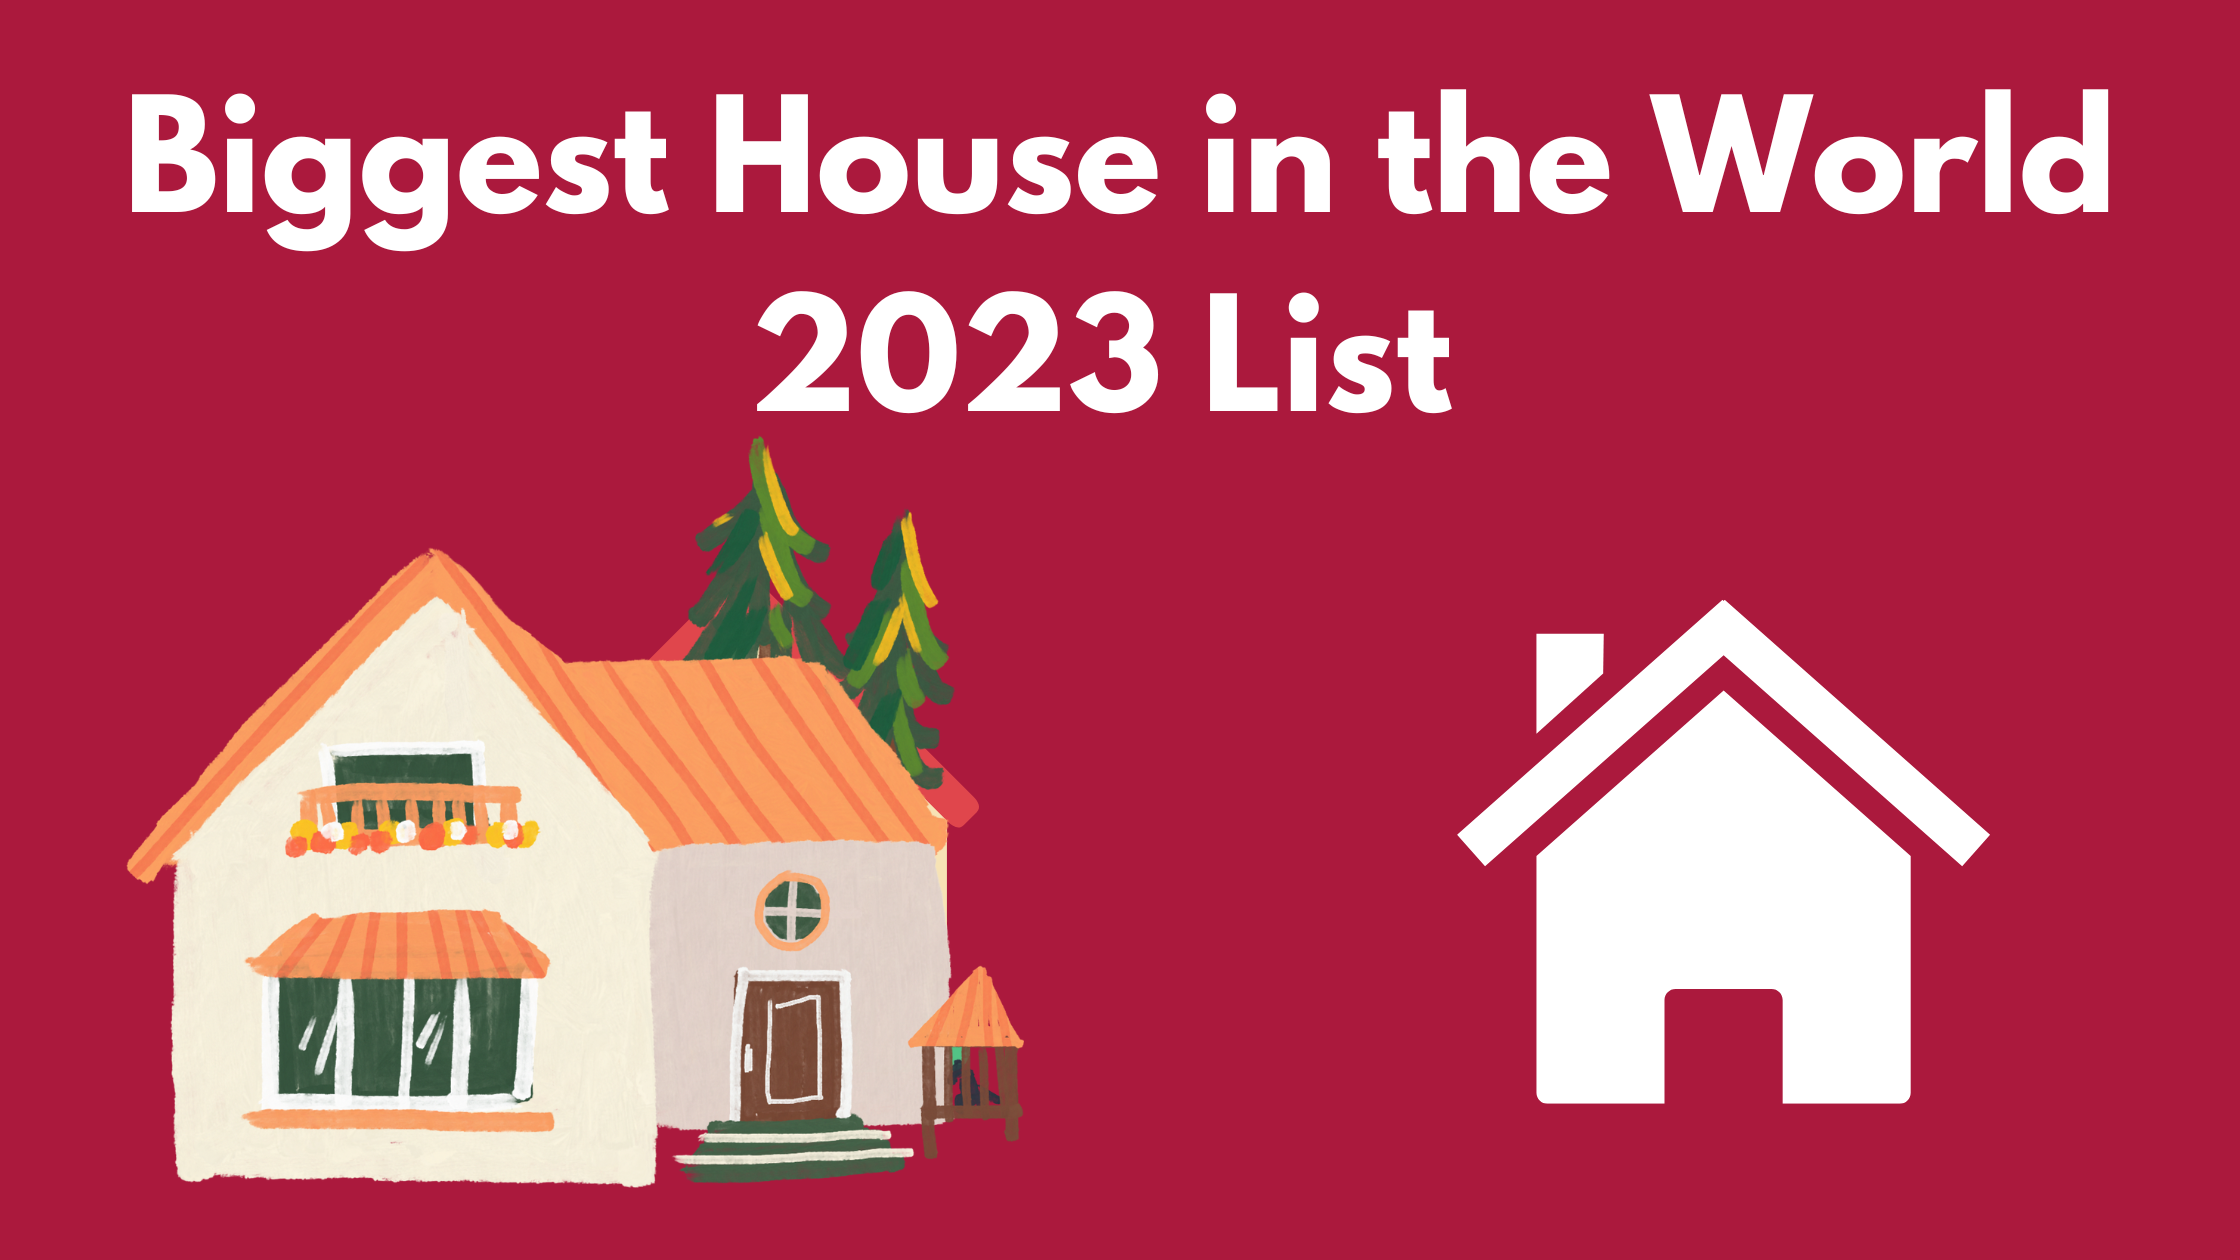 Biggest House in the World 2023 List